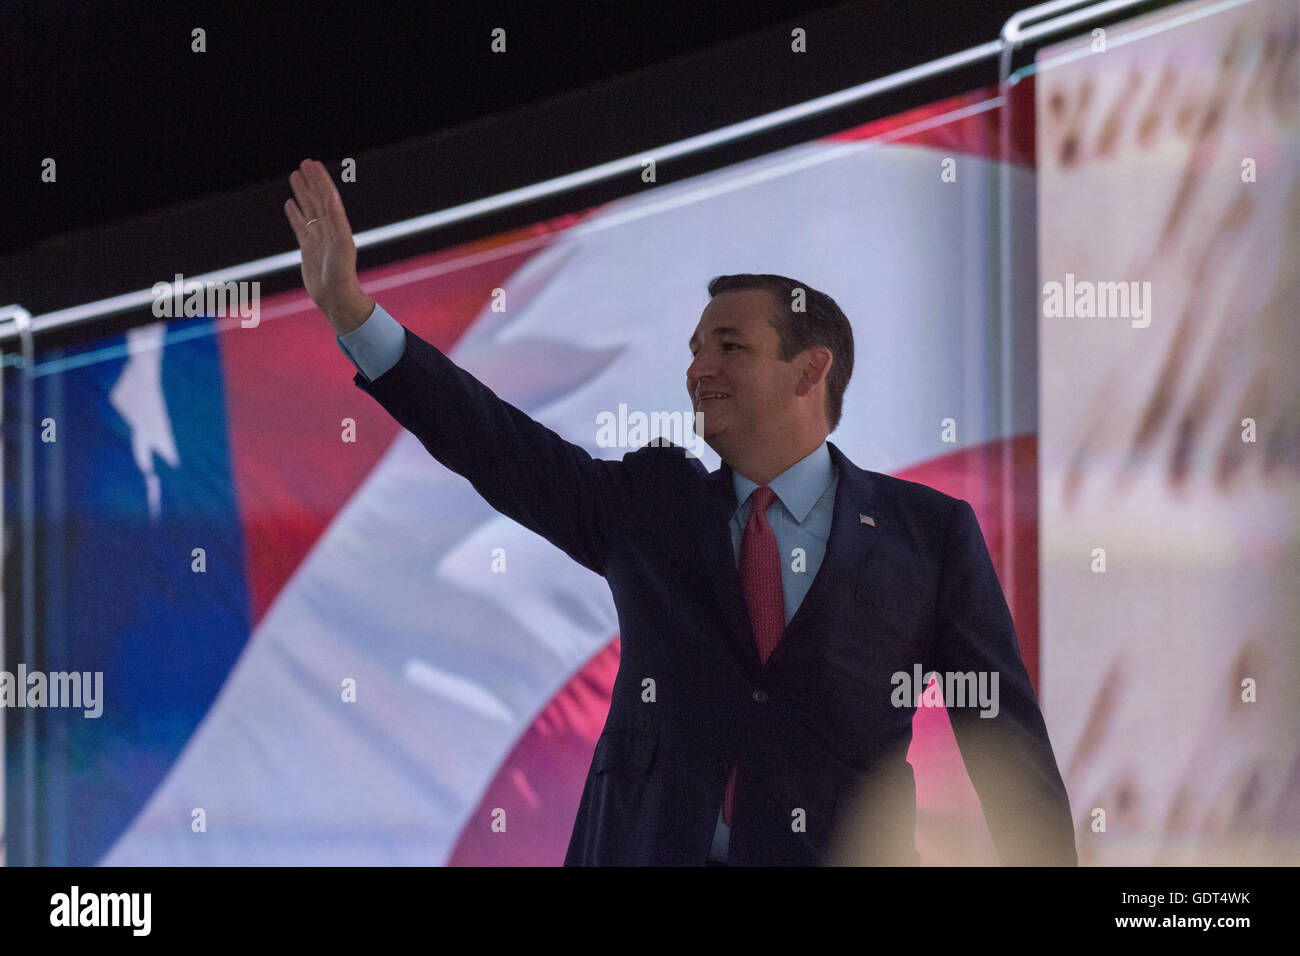 Senator Ted Cruz walks off stage in the dark after being cut off by officials during his addresses during the third day of the Republican National Convention July 20, 2016 in Cleveland, Ohio. Cruz spoke without endorsing Republican Presidential candidate Donald Trump and told delegates to vote with their conscience. Stock Photo